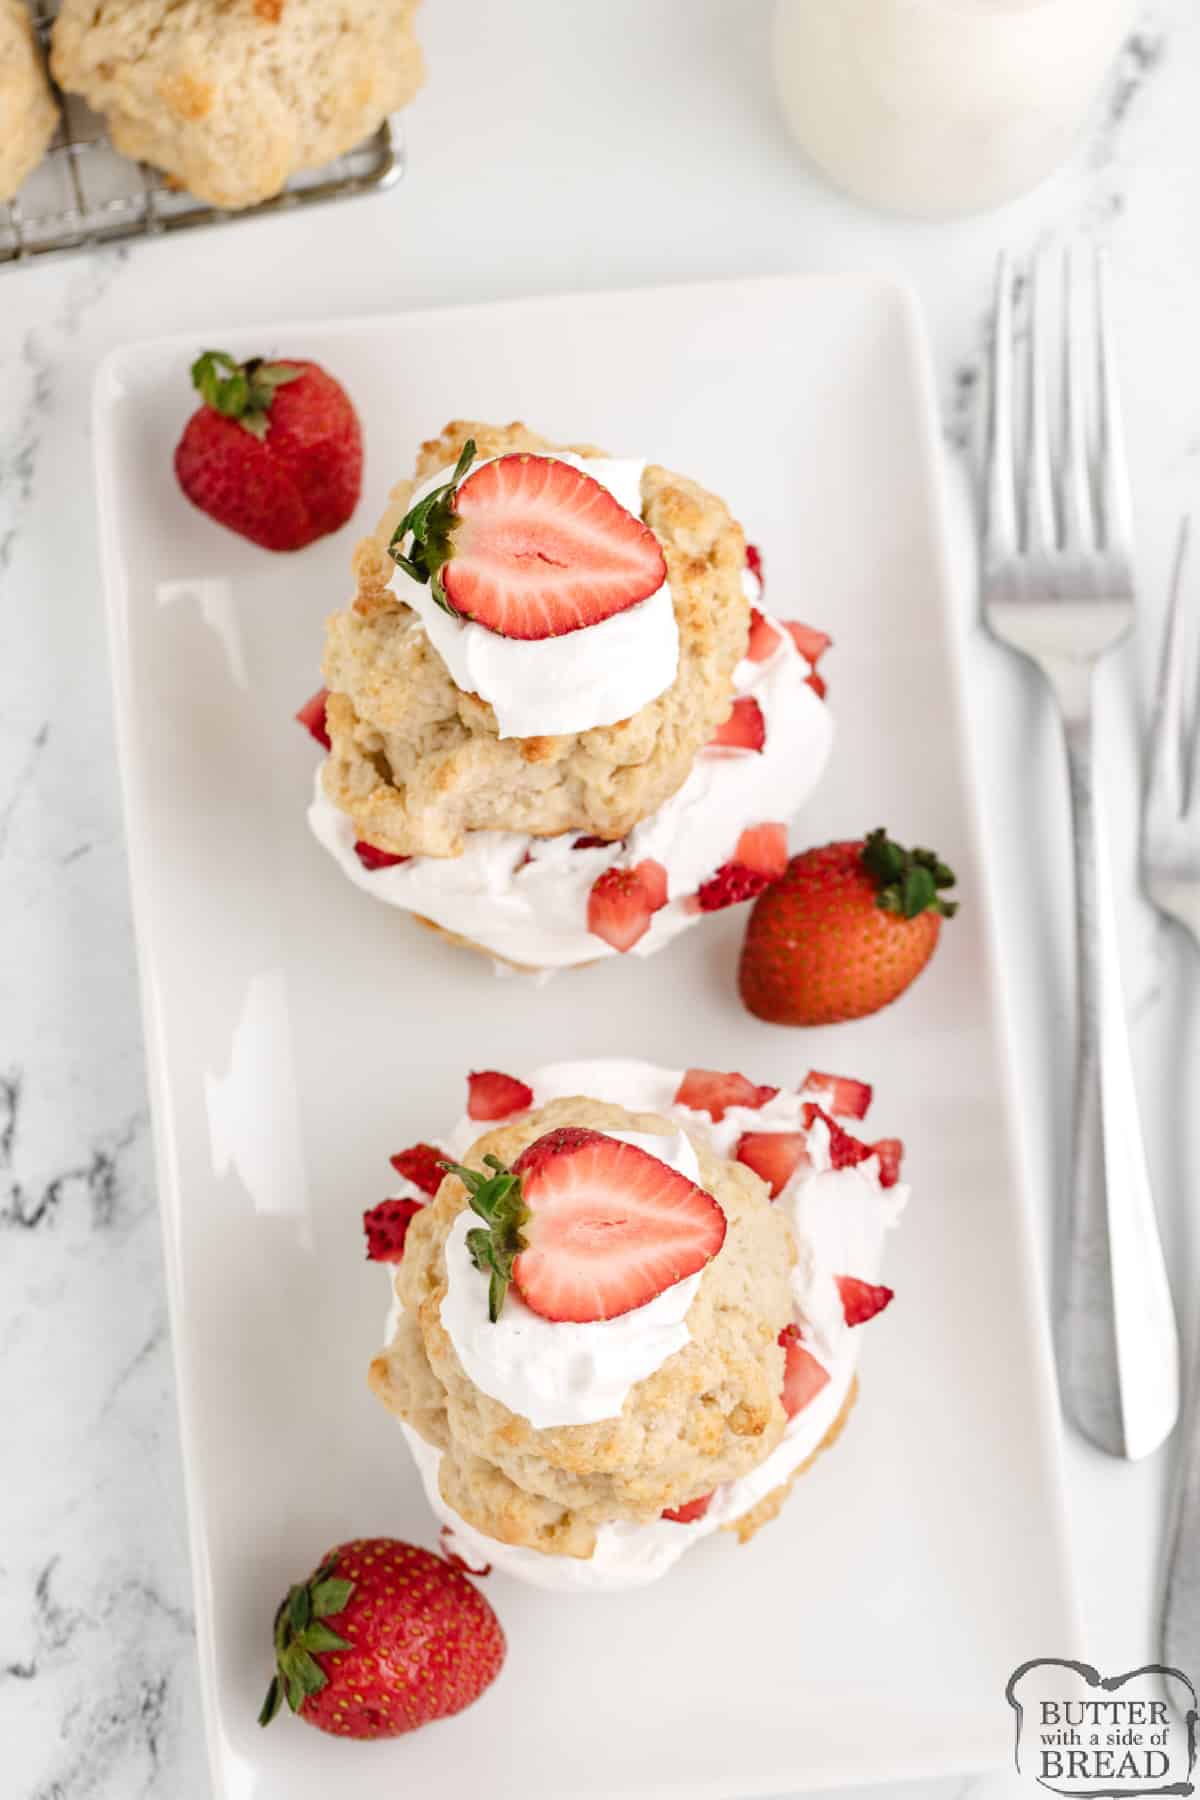 Individual shortcakes with whipped cream and strawberries.